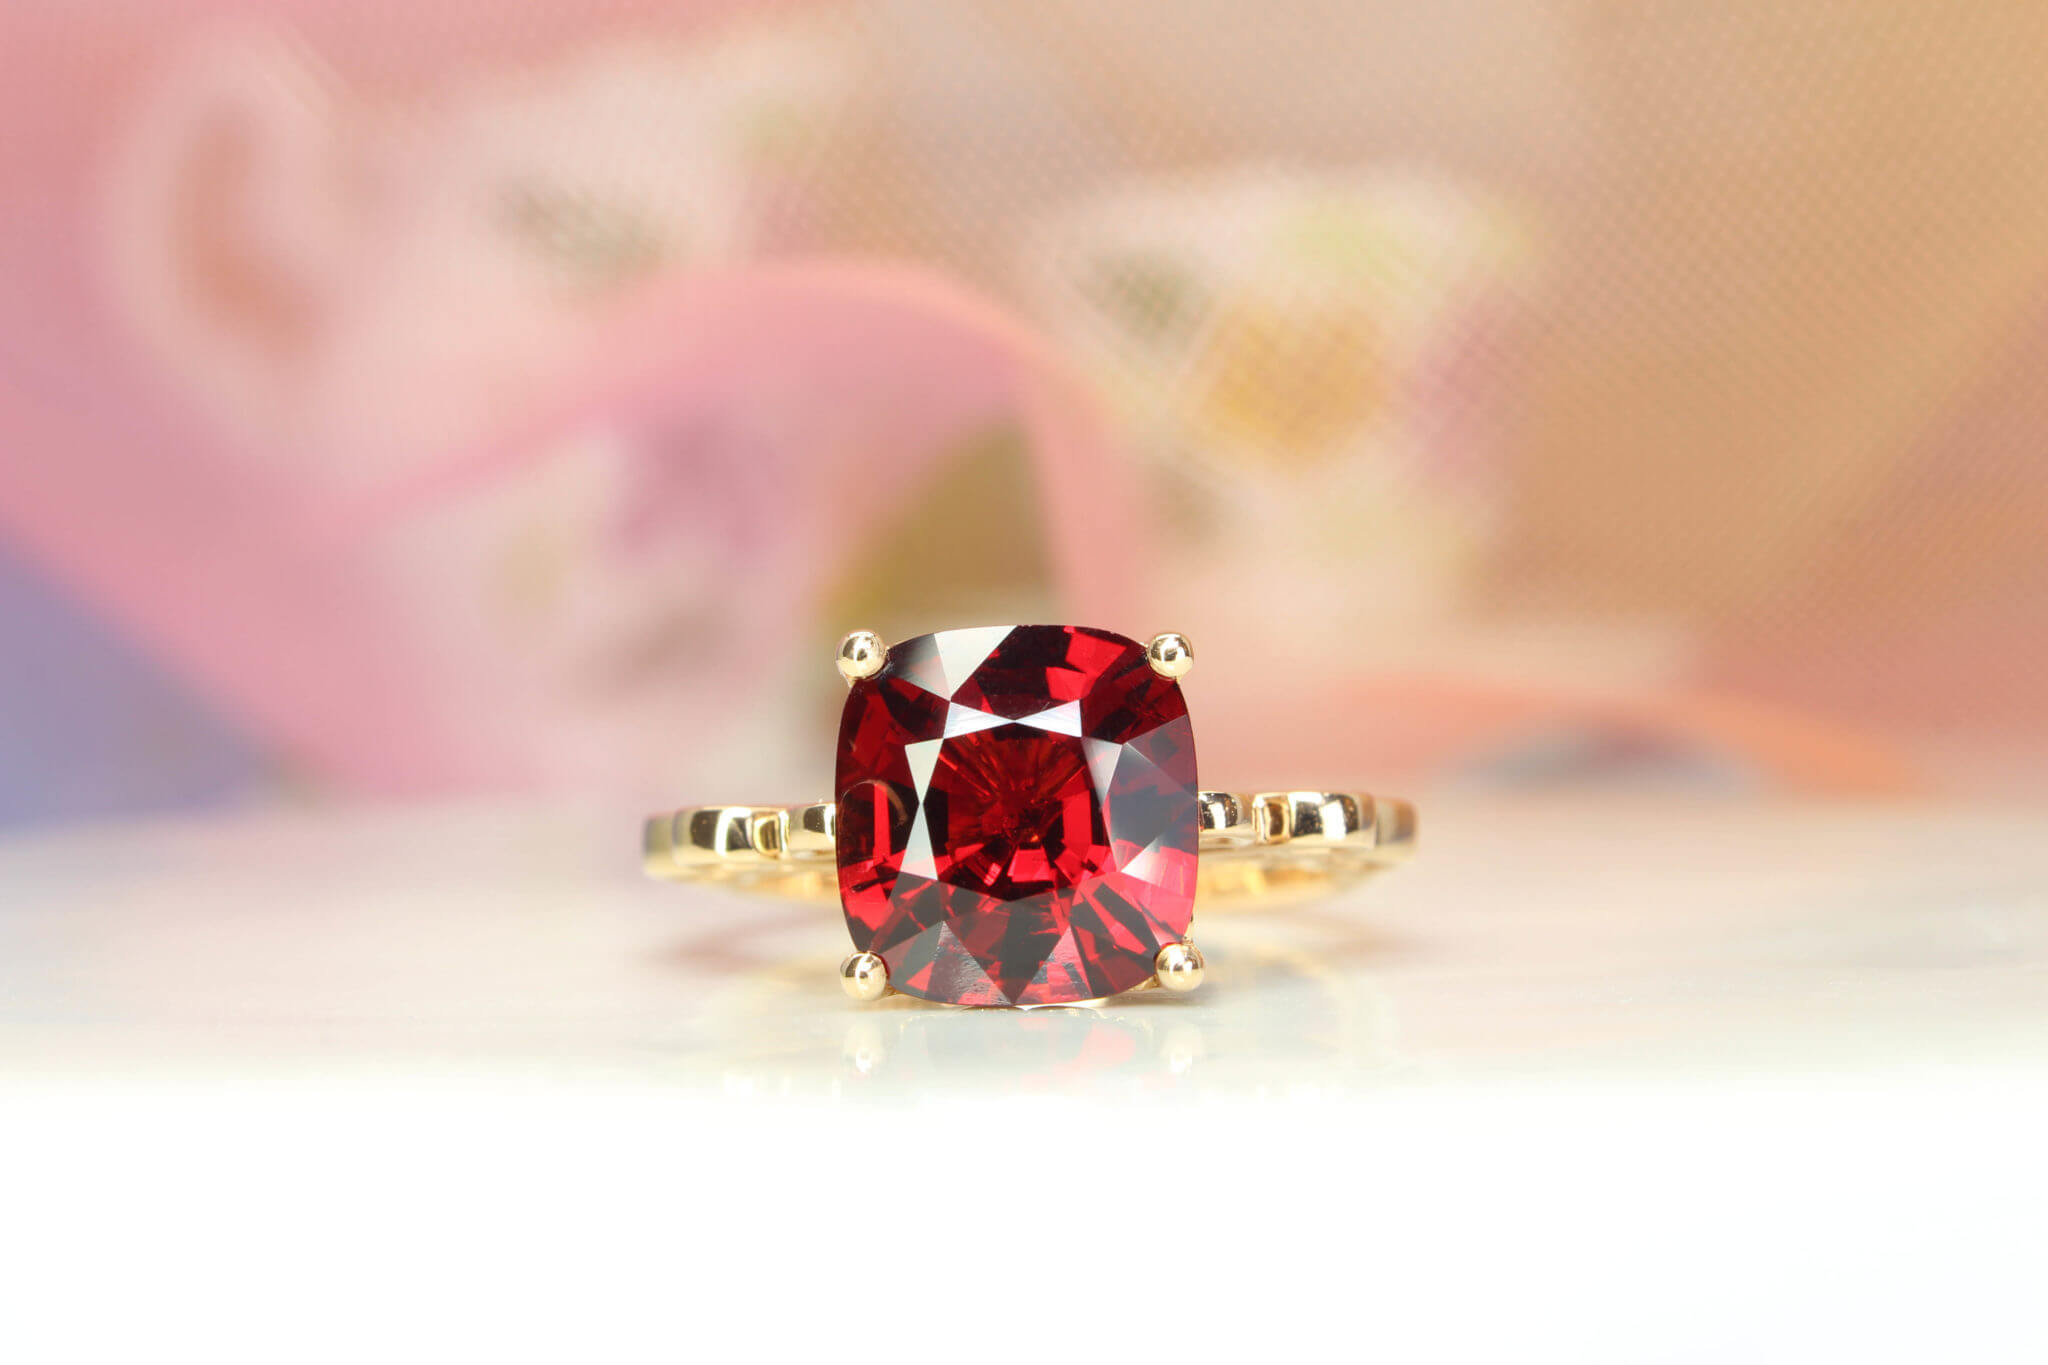 This cinderella carriage fairy tale design ring is a classic example of timeless artistry with vivid red spinel gemstone. The delicate designing of the pumpkin coach featuring a majestic red spinel and diamond elegantly completes this modern design | Local Singapore Jeweller in customised jewellery and wedding jewellery with fairy tale story.